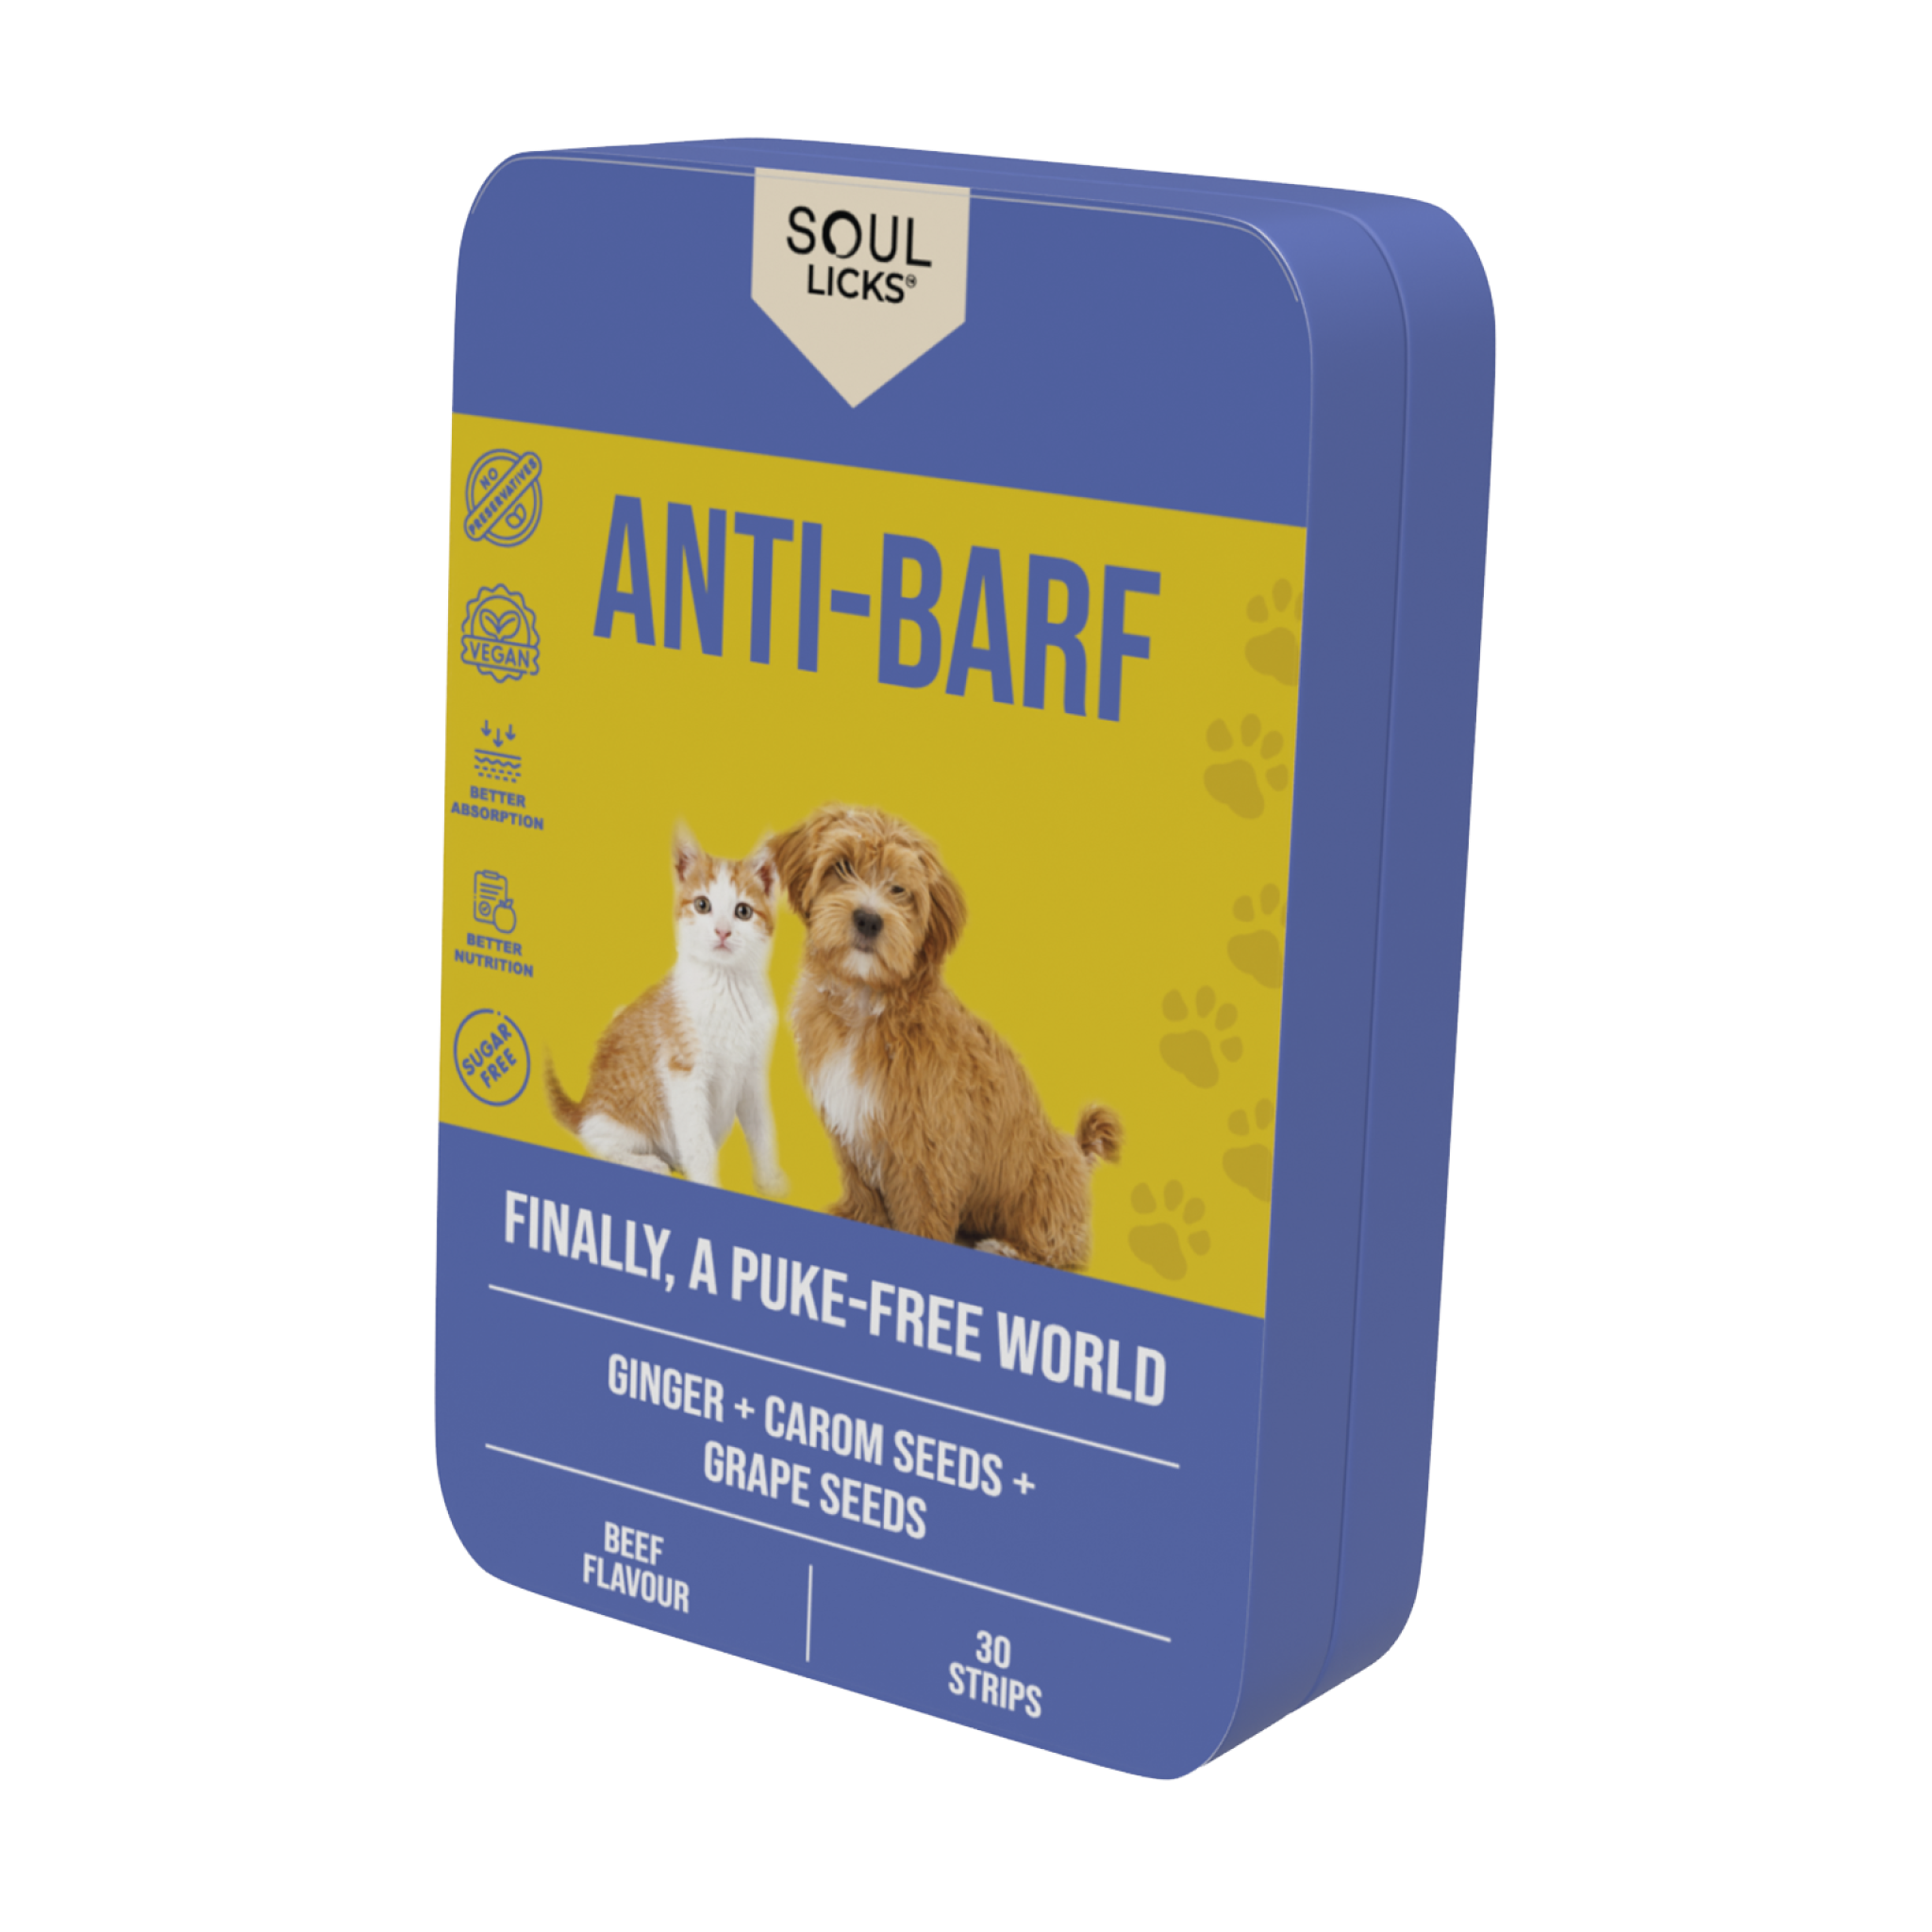 Anti-Barf - Nausea relief for your pet friend!